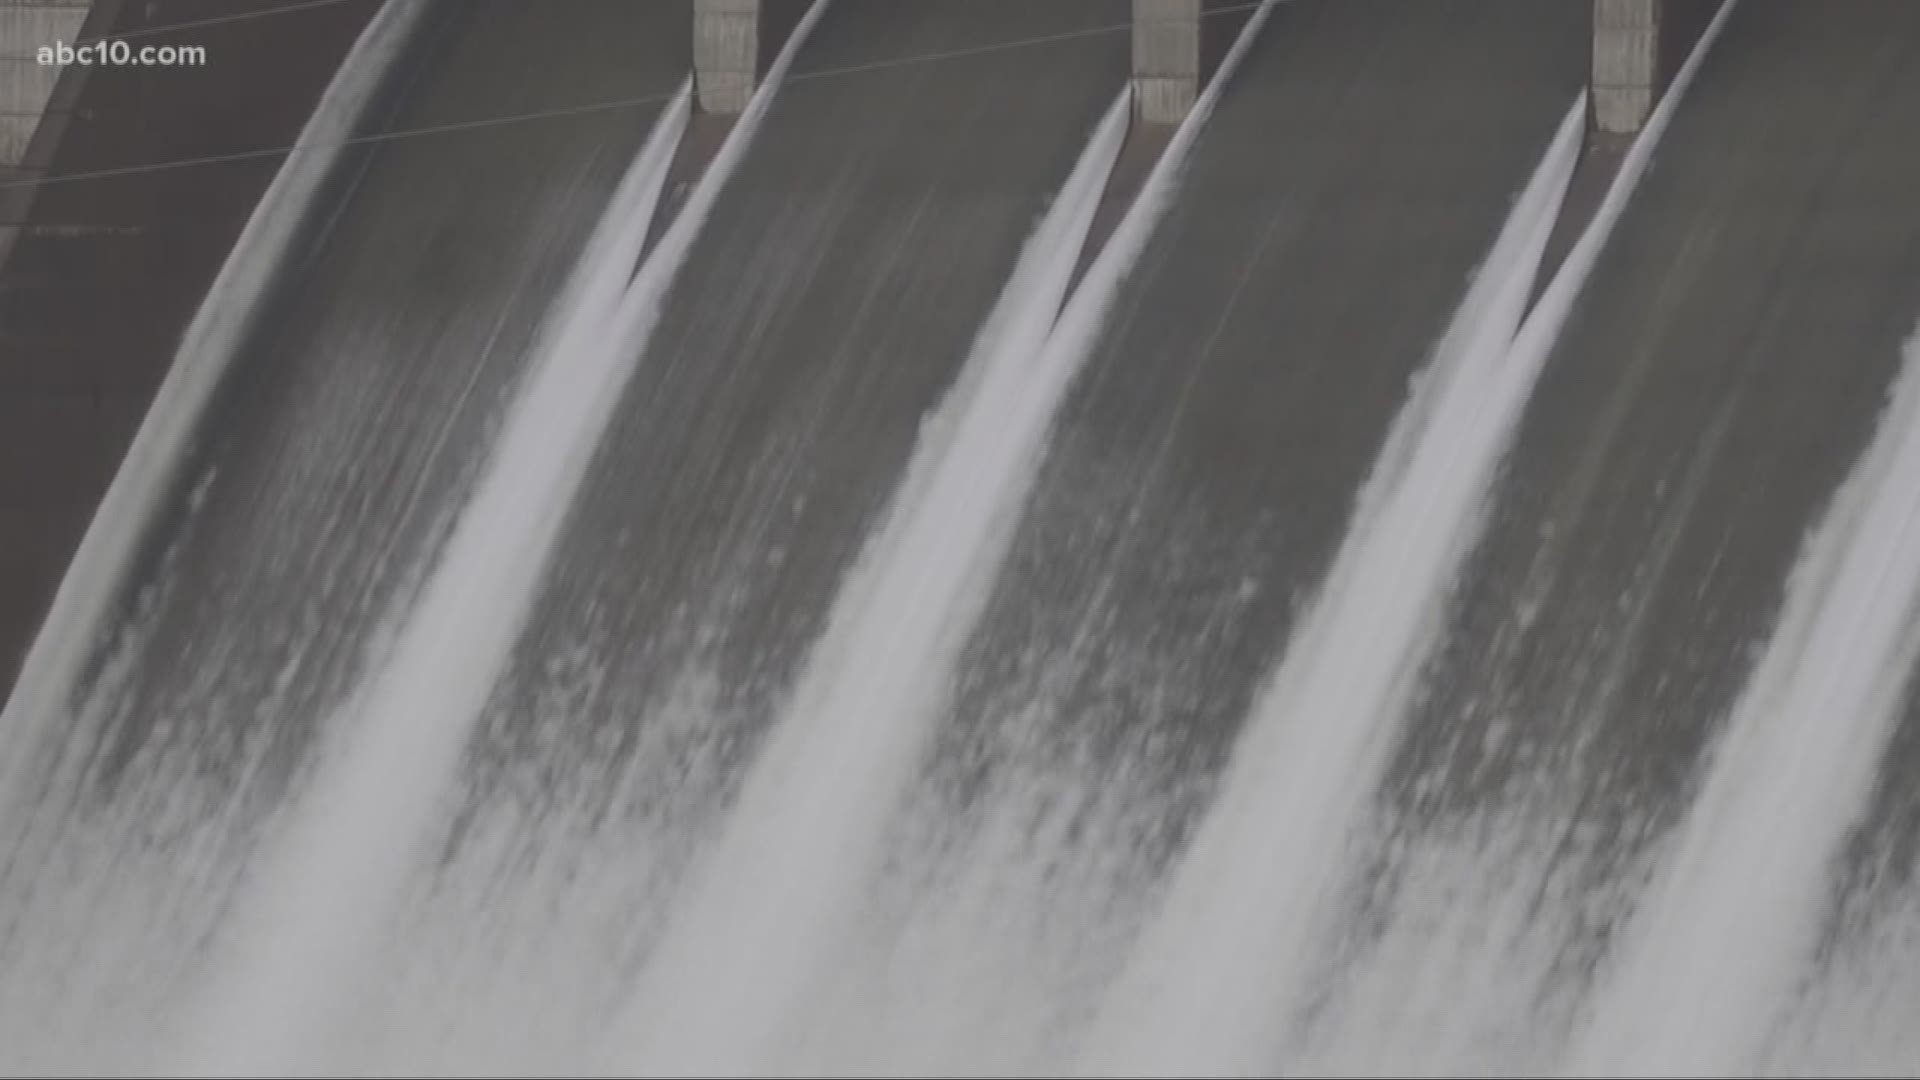 The Folsom Dam Raise project, which is expected to be completed in 2025, increases the height of the dam with the hope of avoid catastrophic flooding.